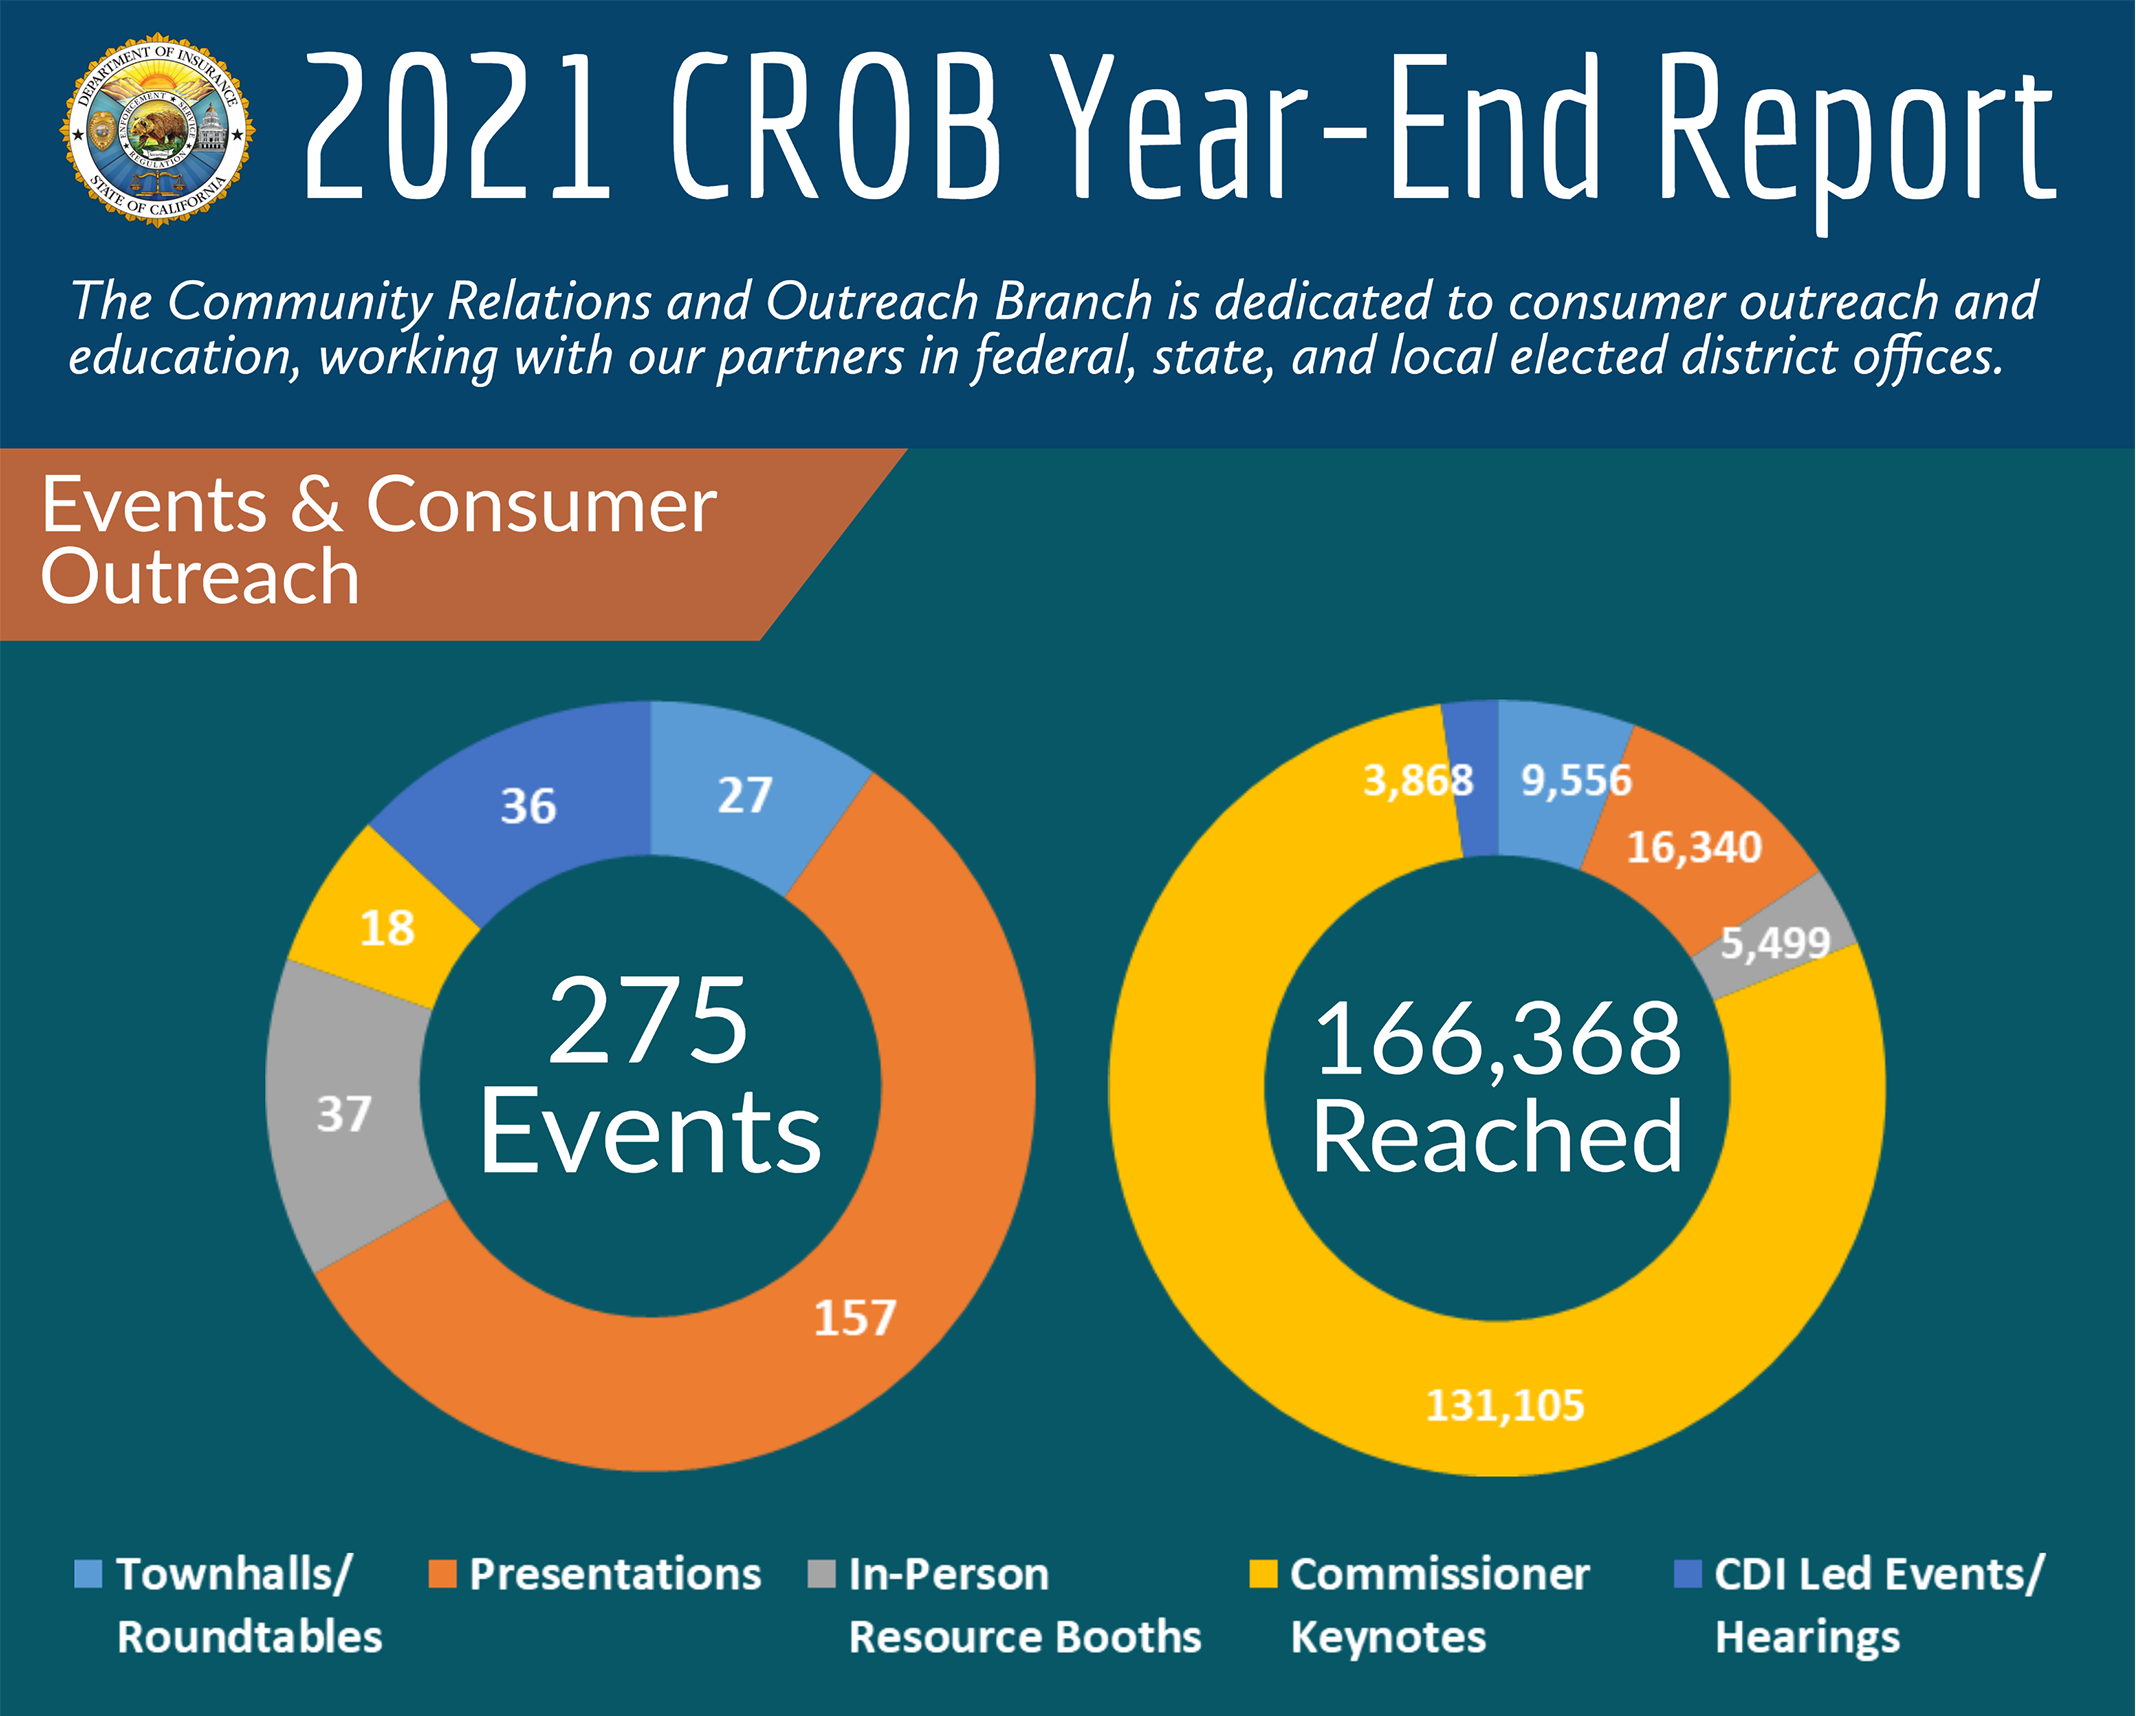 2021 CROB Year-End Report/The Community Relations and Outreach Branch is dedicated to consumer outreach and education, working with our partners in federal, state, and local elected district offices. 275 Events and a total of 166,368 Reached. 